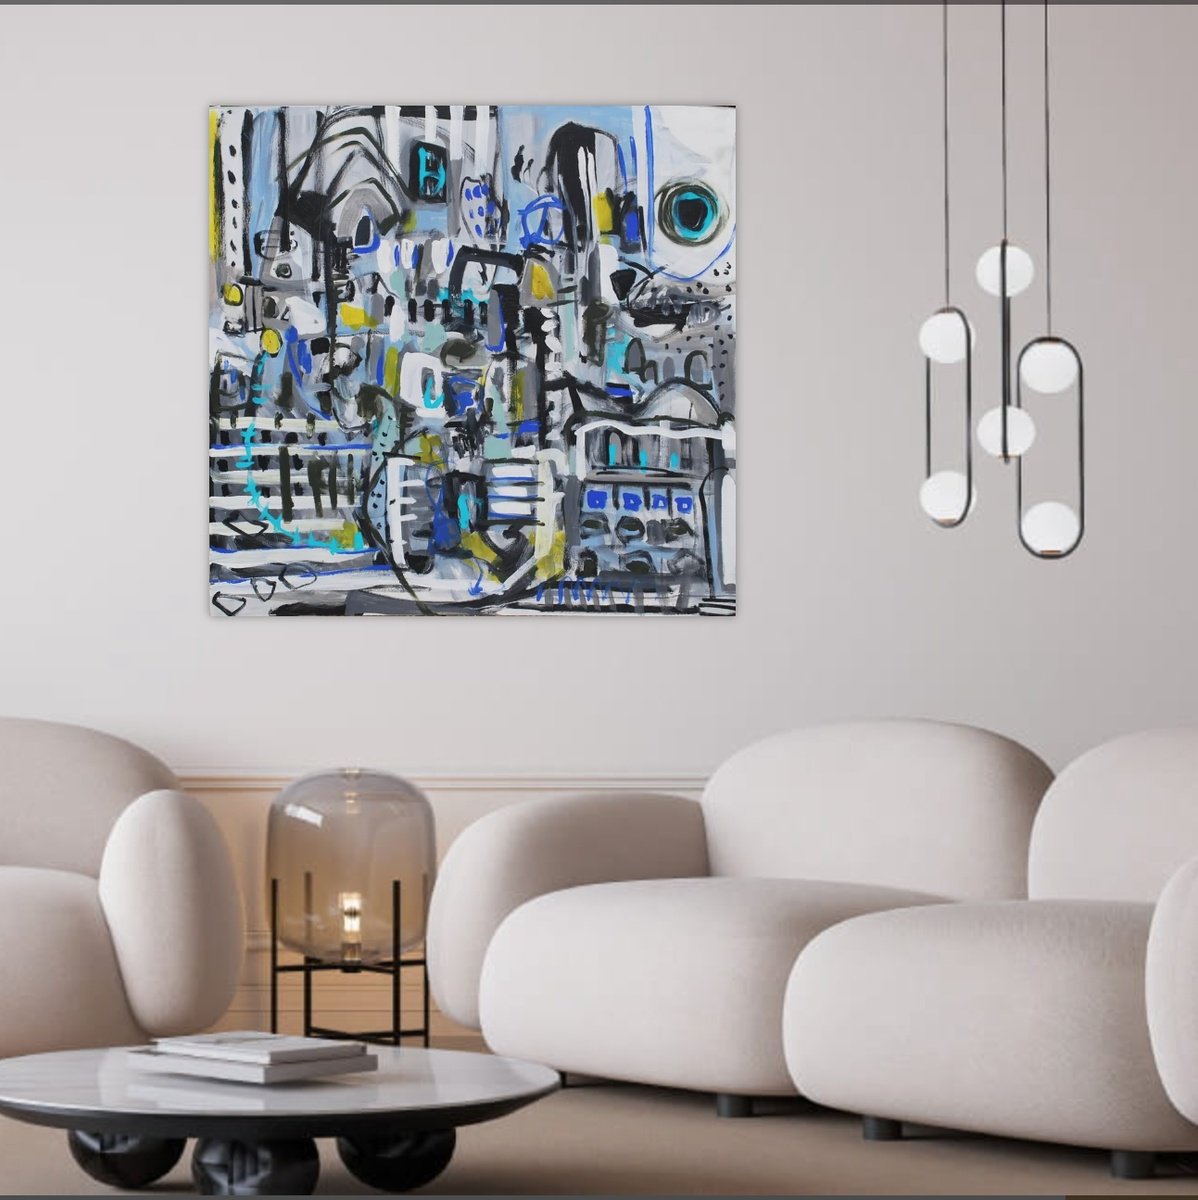 Black and white abstract painting on canvas - Dusk before dawn by Aasiri Wickremage